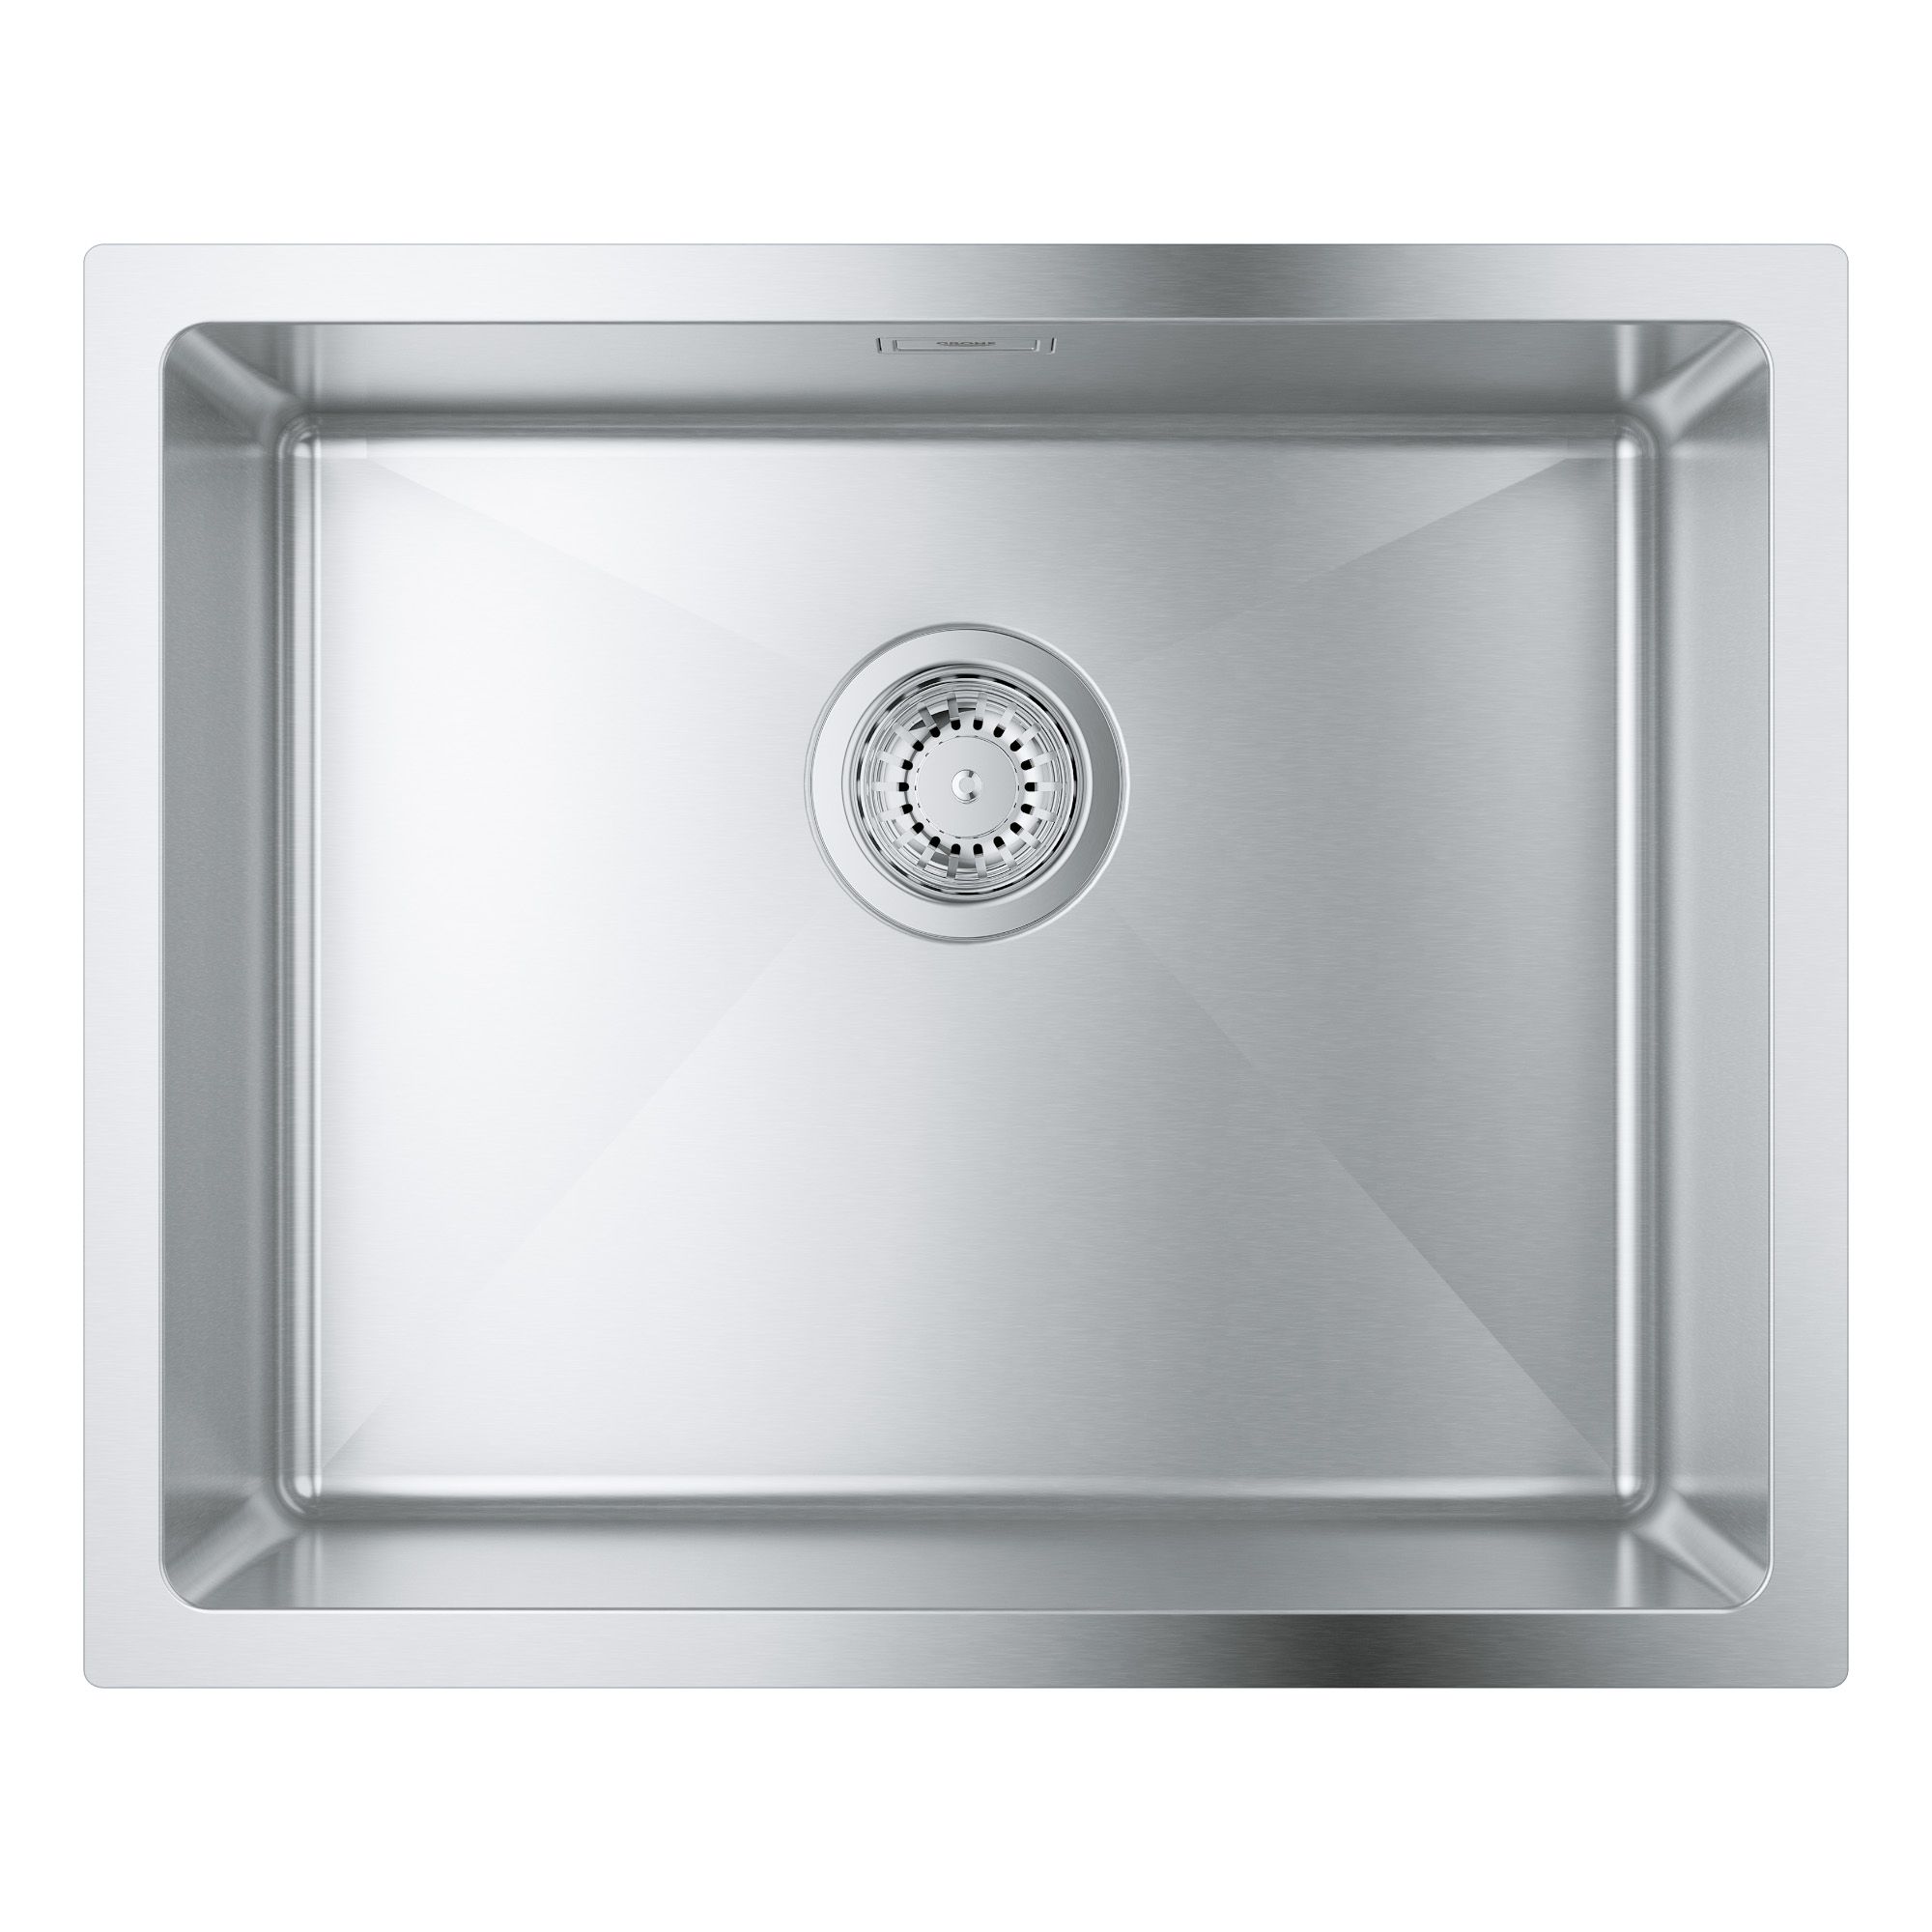 Grohe K700U Stainless steel 1 Bowl Kitchen sink 450mm x 550mm